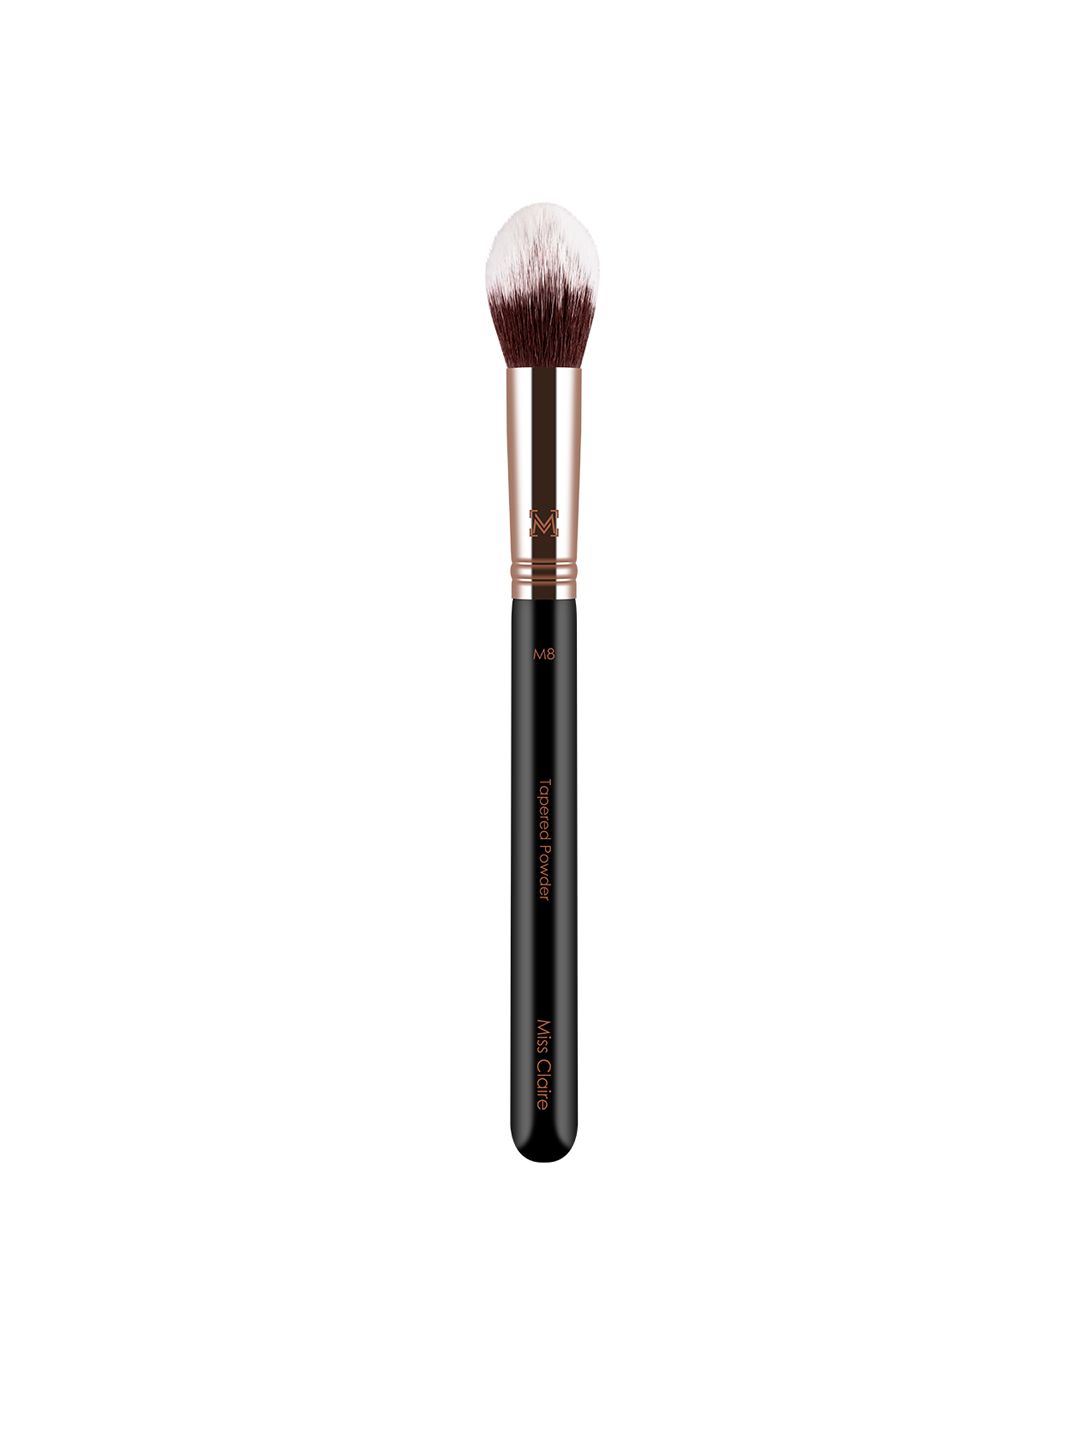 Miss Claire M8 - Tapered Powder Face Brush (S) - Rose Gold-Toned & Black Price in India